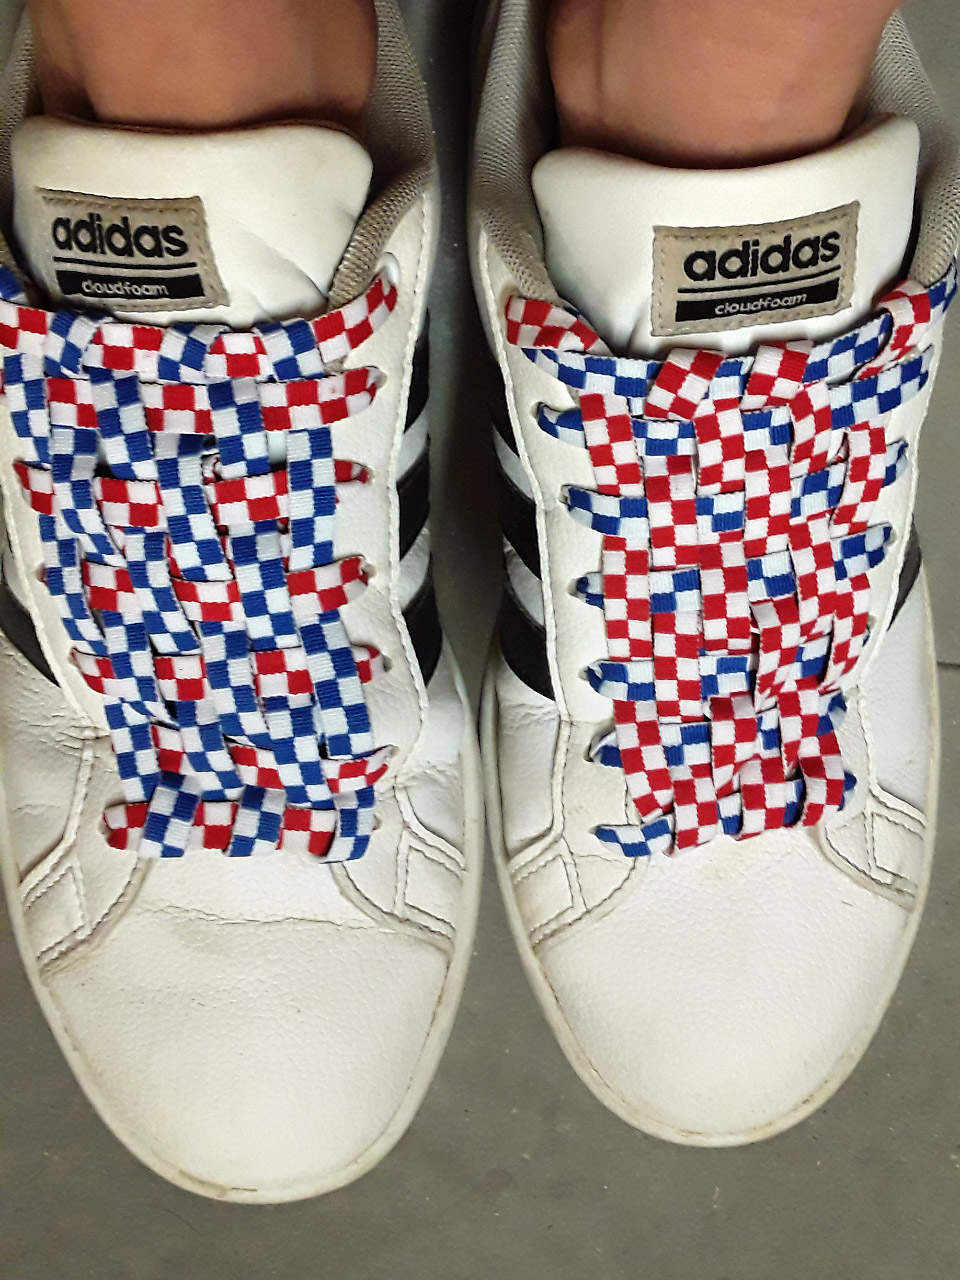 Professor Shoelace on Twitter: "Ian's Lacing Photo the Week Kristi I's white Adidas sneakers with trim and red &amp; white and blue &amp; white “Checkerboard Lacing”: https://t.co/WW4MEhwUPI https://t.co/KFSXwgSA40" /